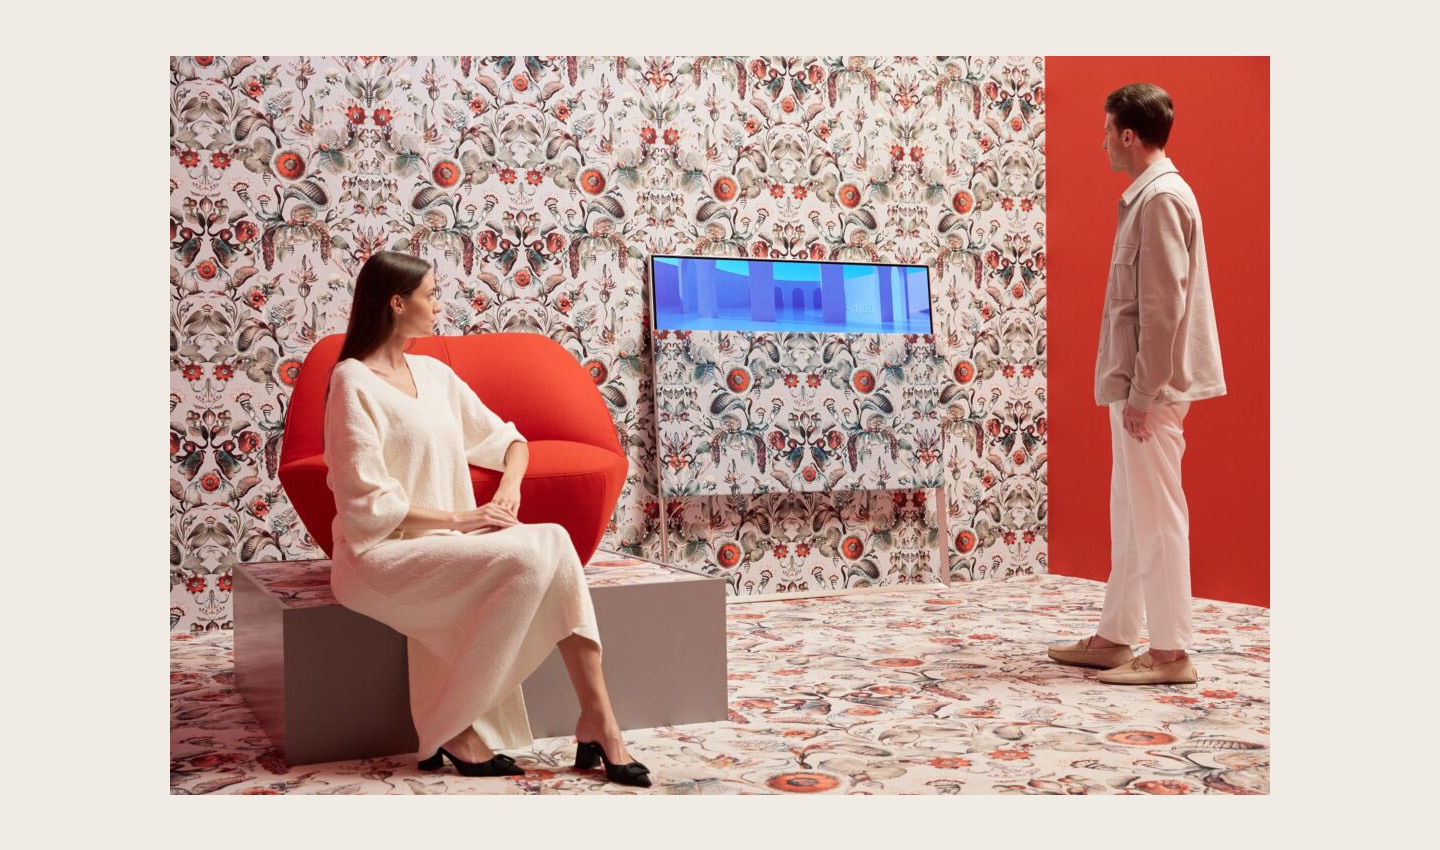 A man and women enjoying the artistic white and red Moooi space designed to display LG OLED Objet Collection Posé and LG PuriCare AeroFurniture in unique patterns and colors